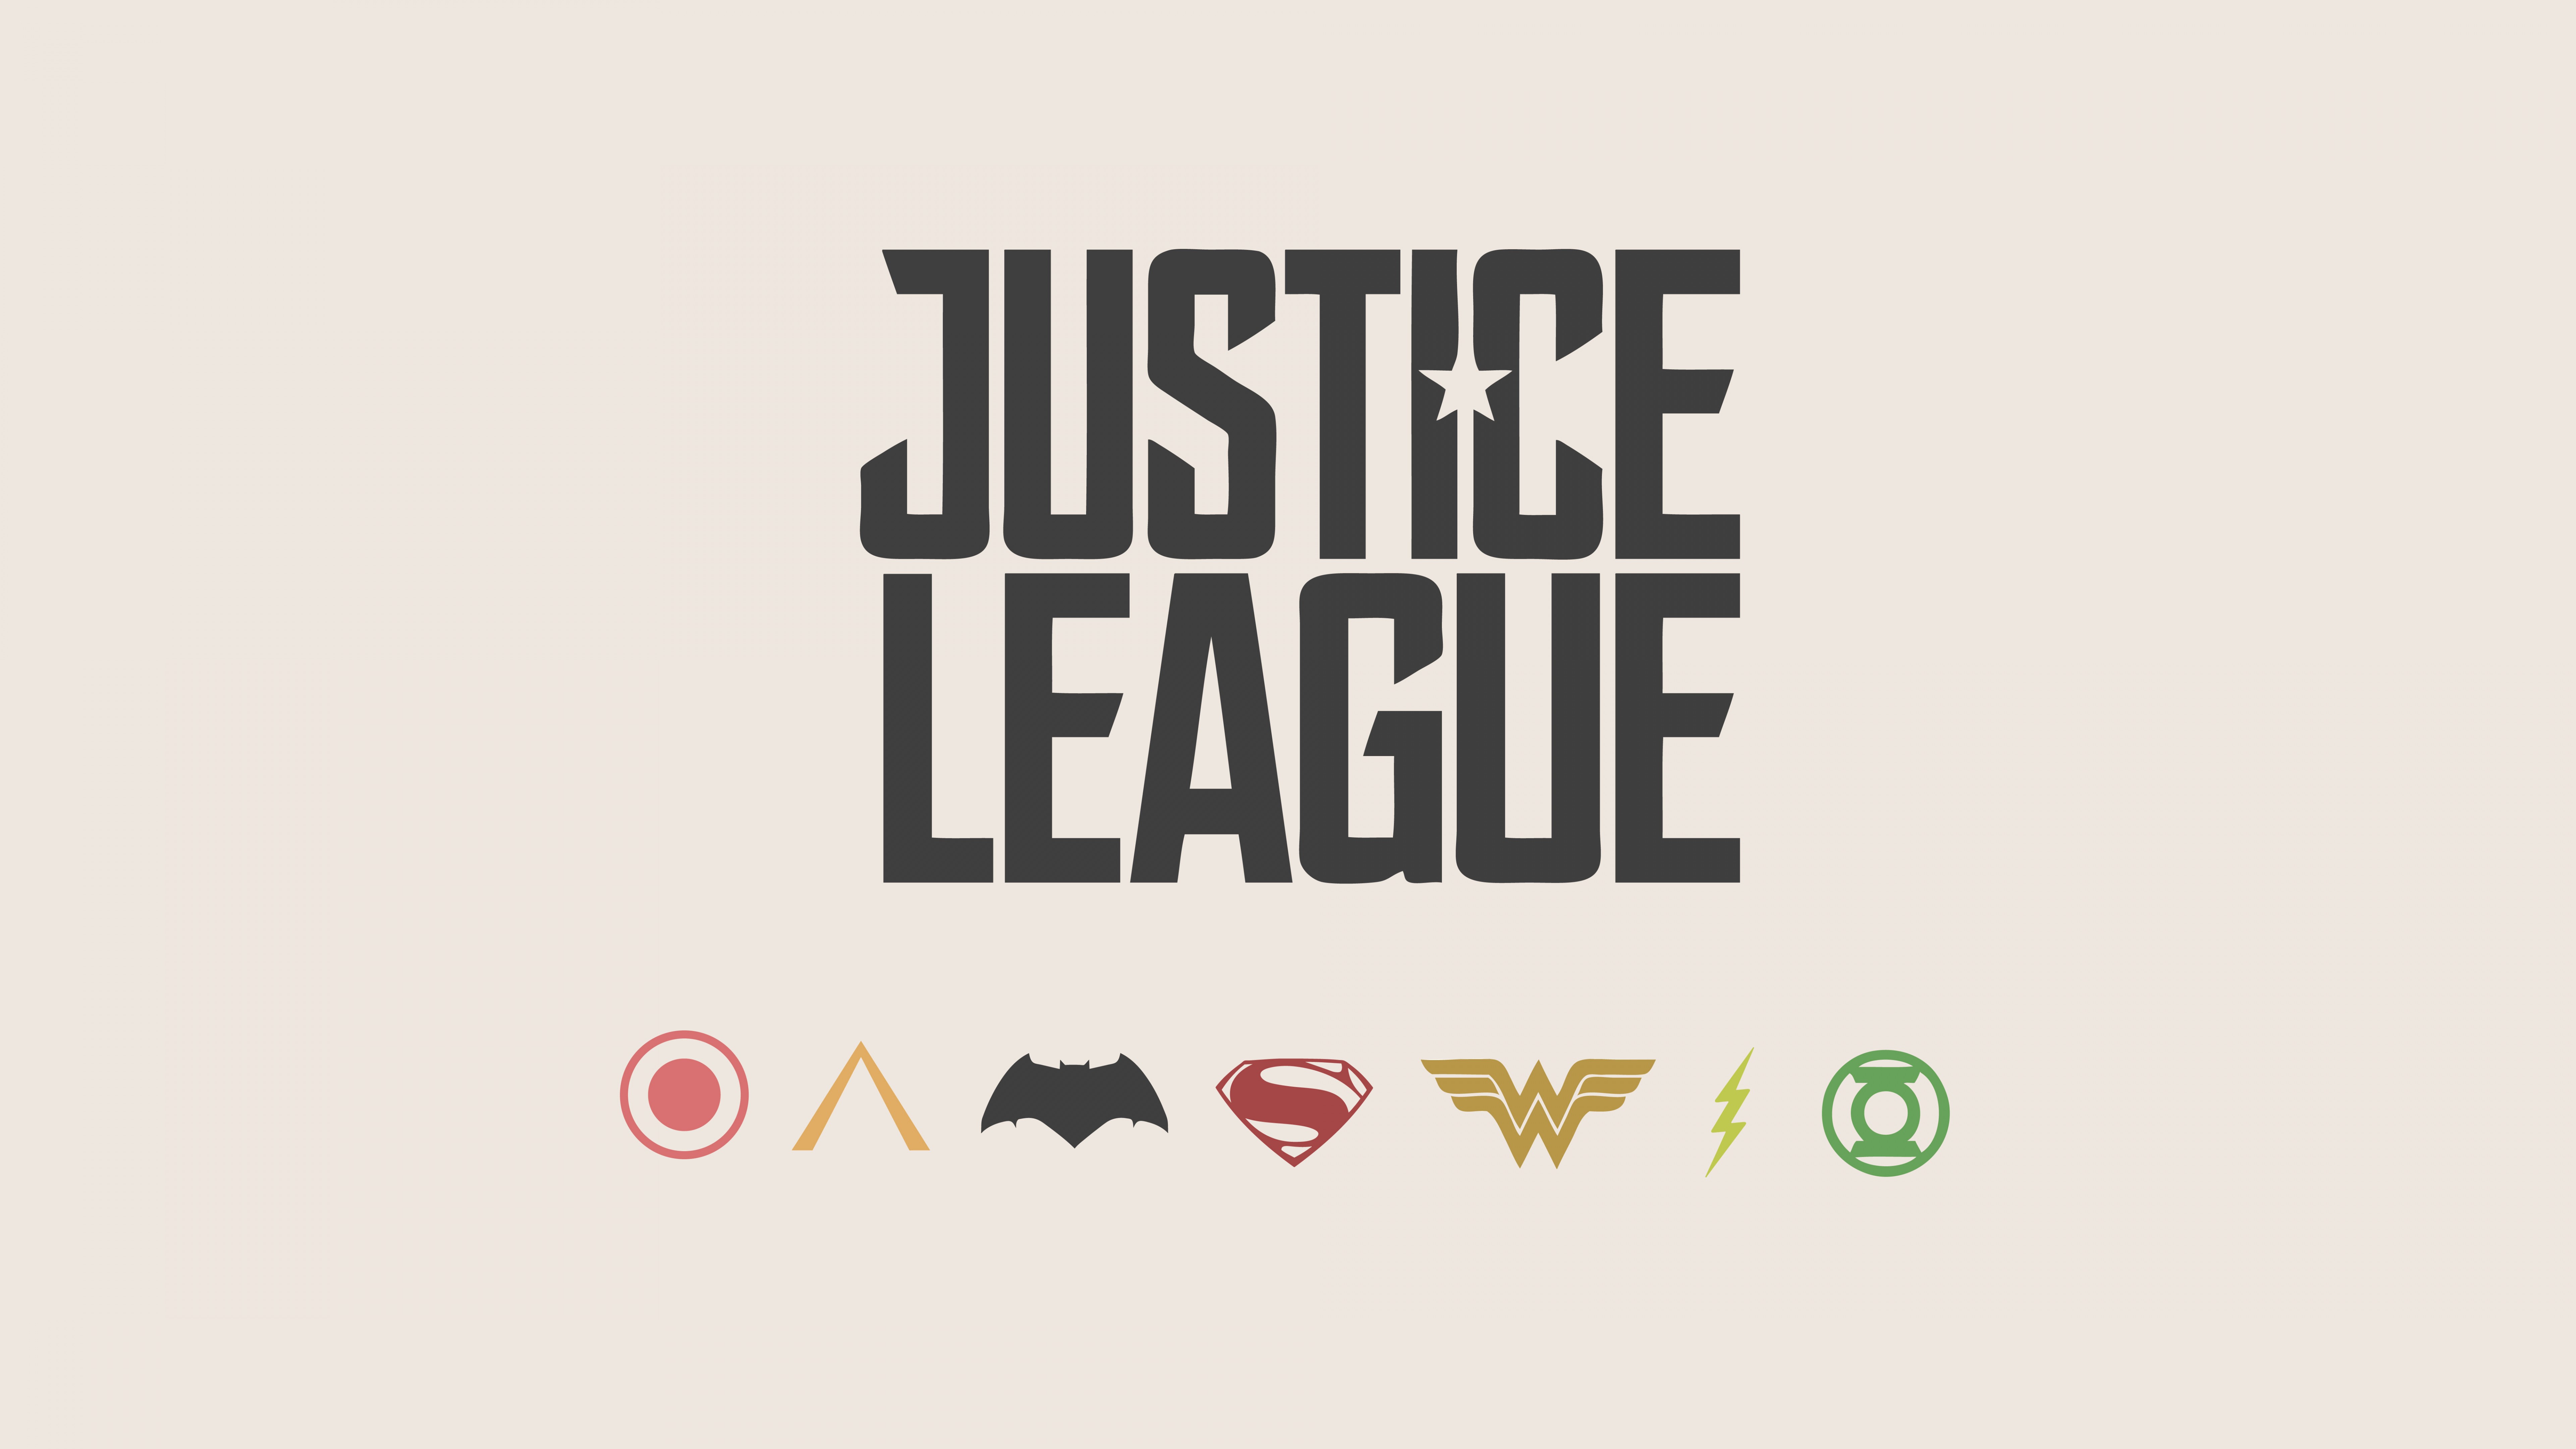 General 7680x4320 Justice League logo white background artwork DC Extended Universe movies simple background superhero DC Comics